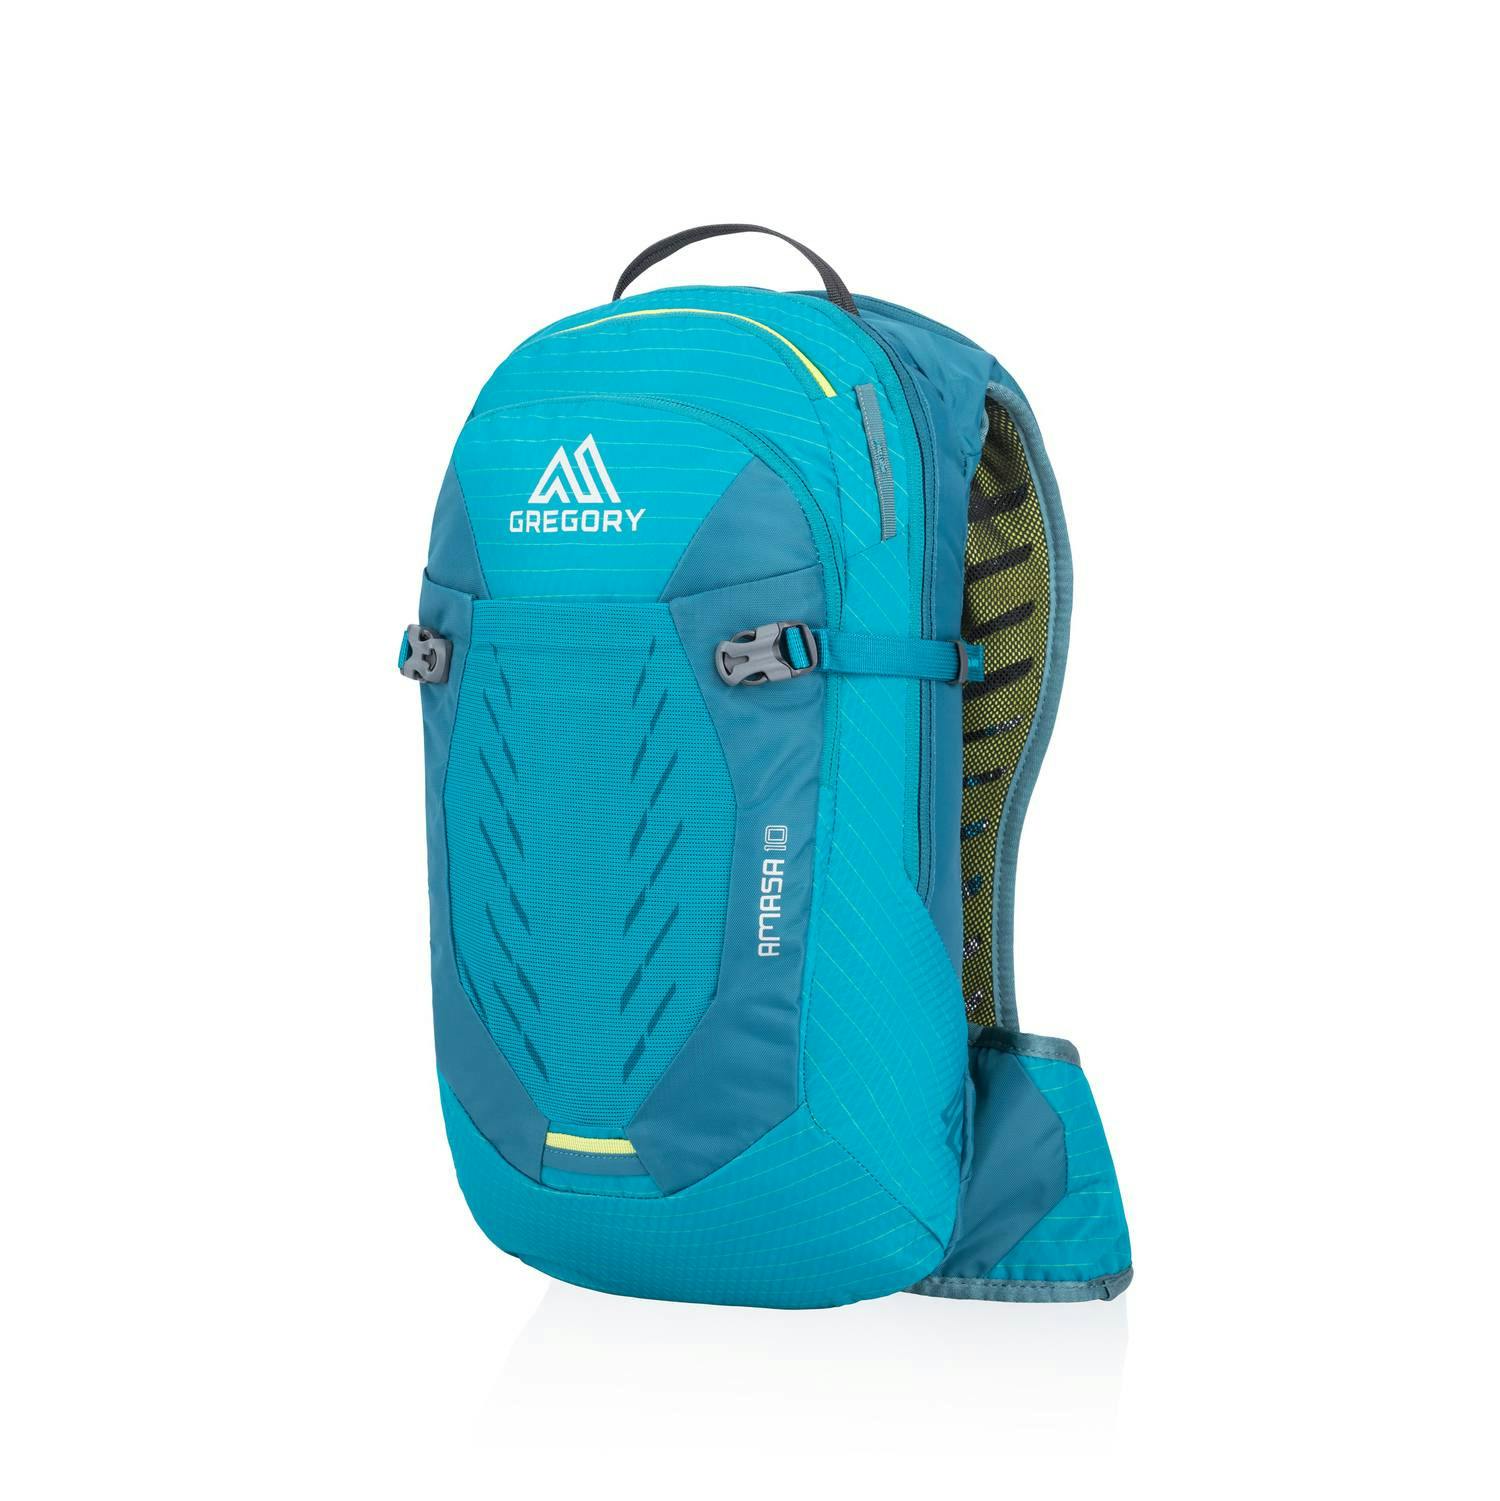 Gregory Amasa 10 Hydration Backpack- Women's · Meridian Teal